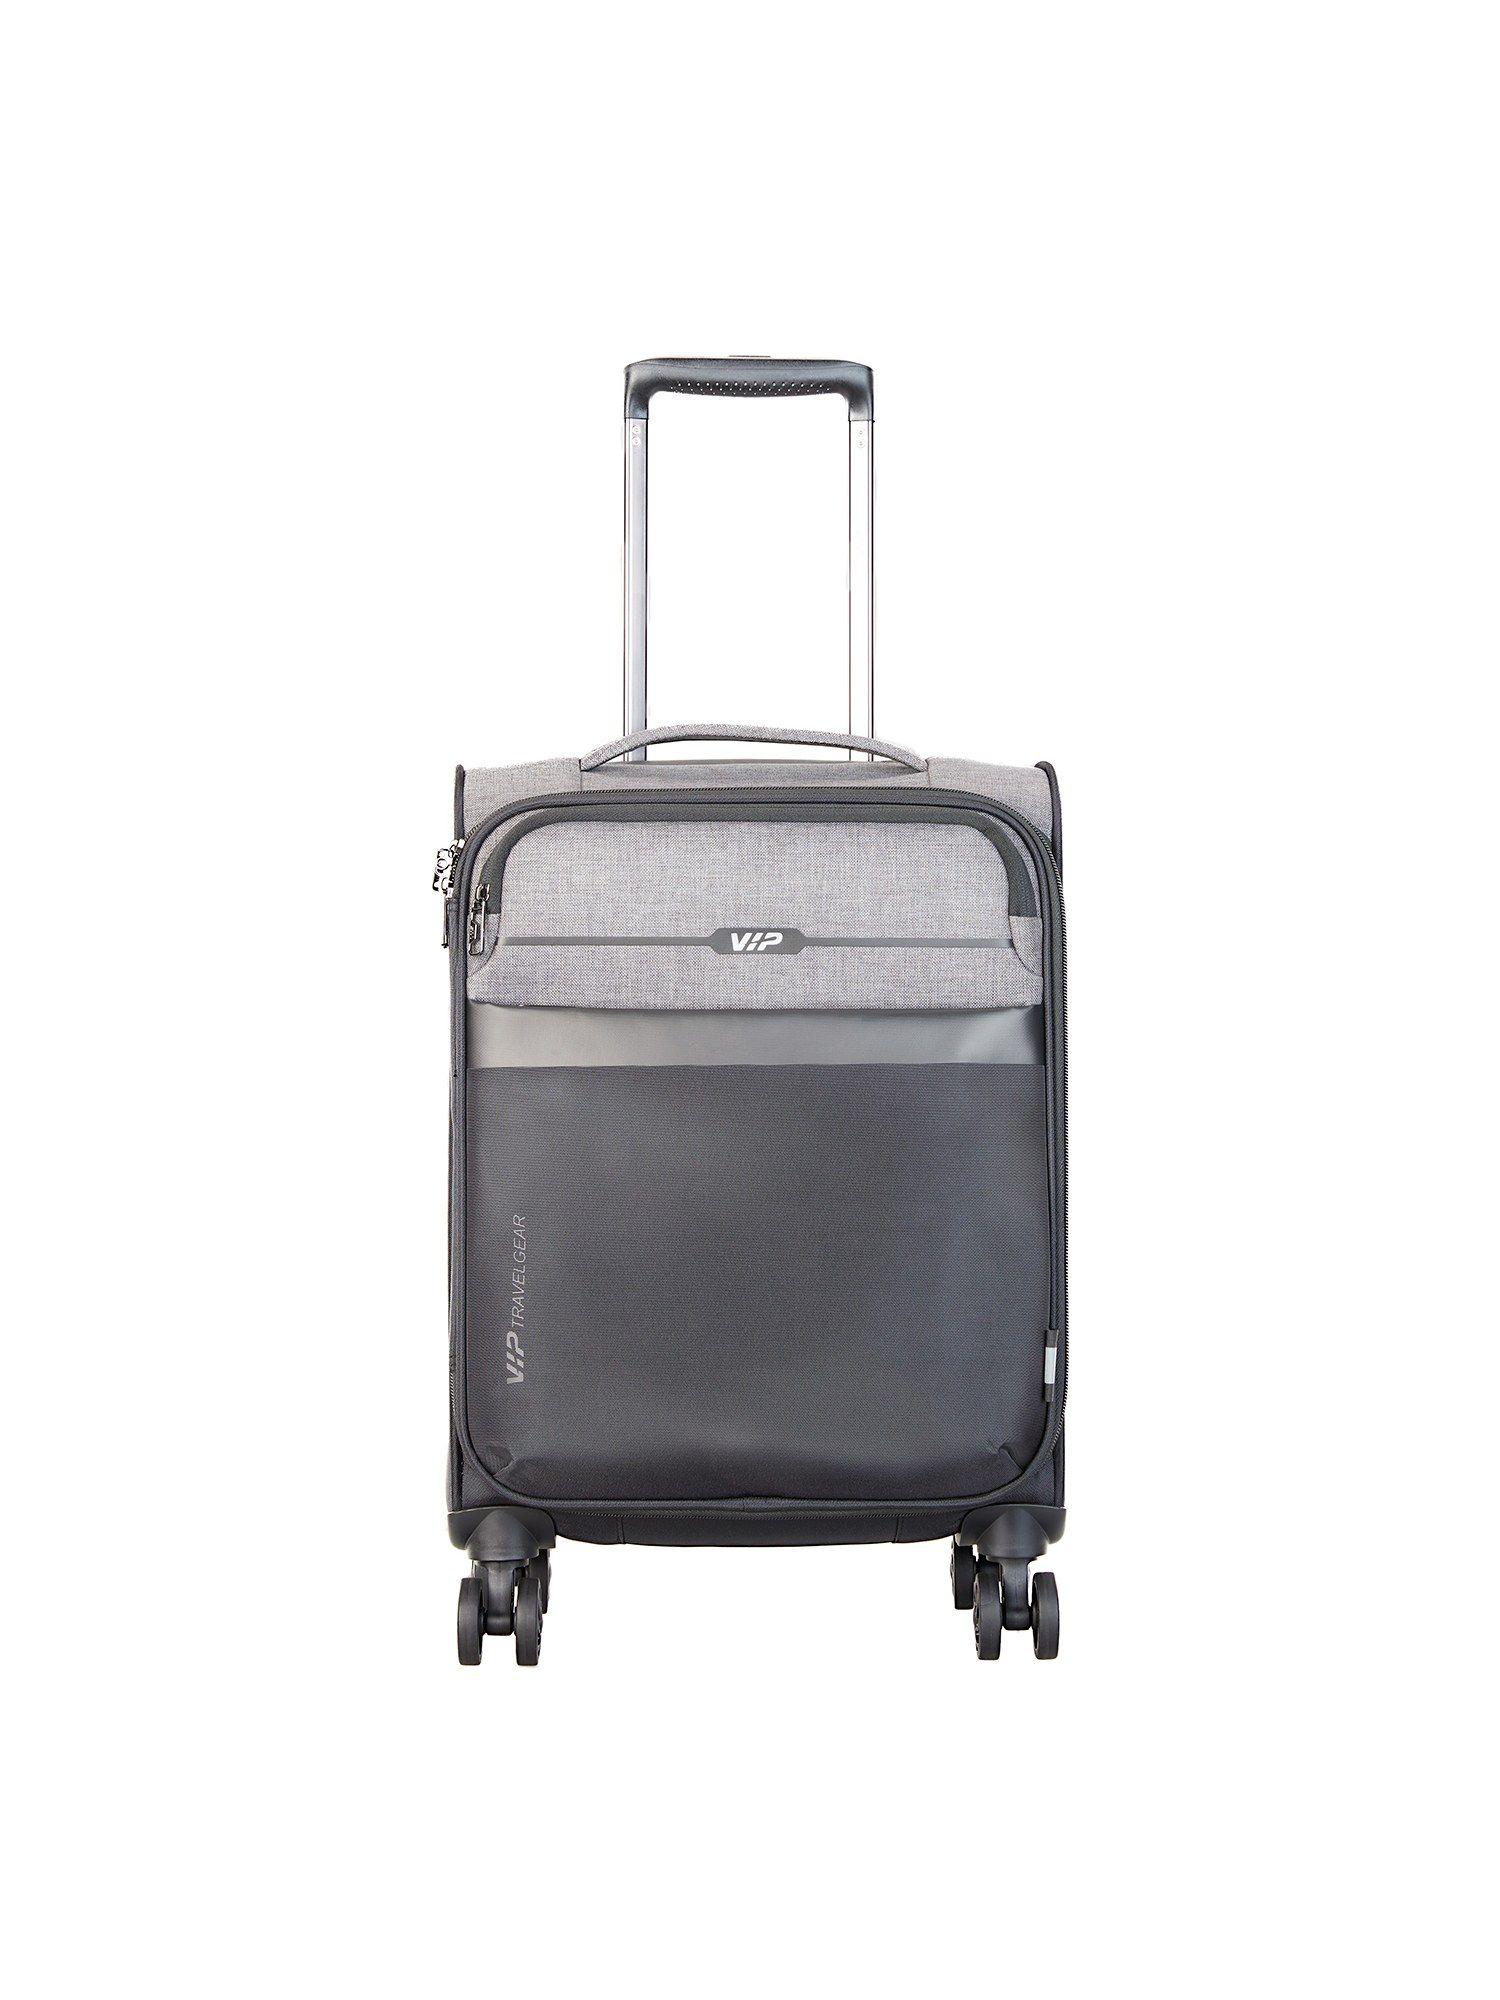 cabin trolley with 8 wheels on suitcase, 360 degree spin grey luggage bag